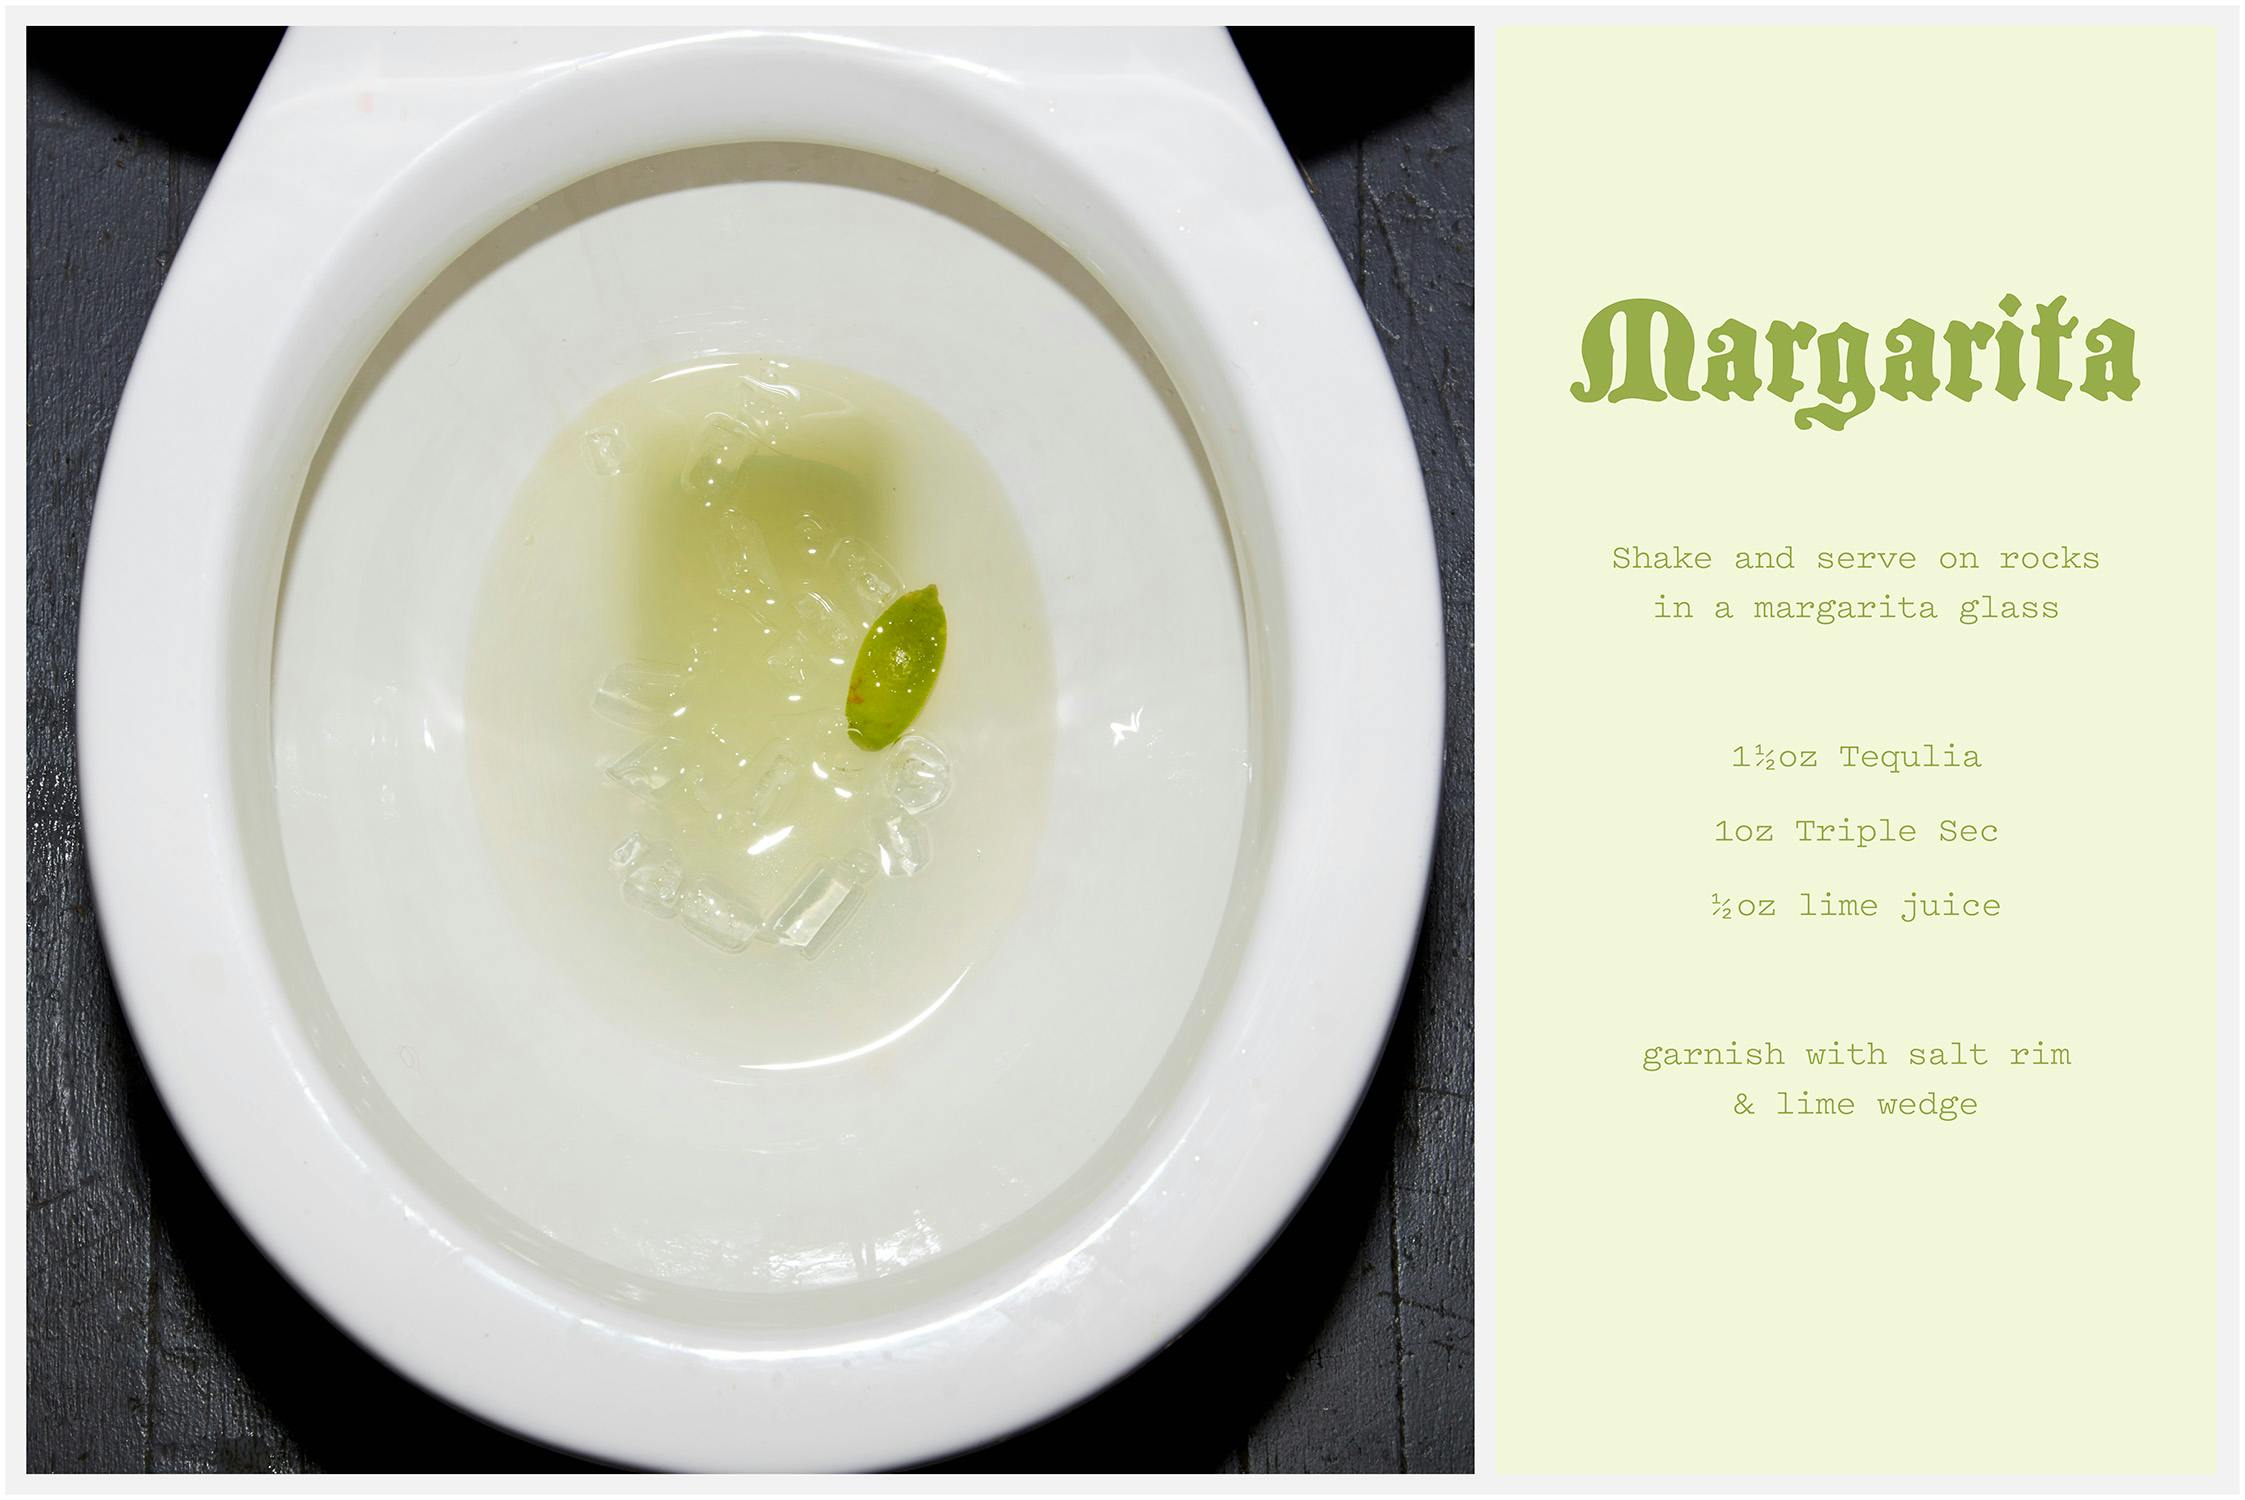 A toilet meant to look like a margarita